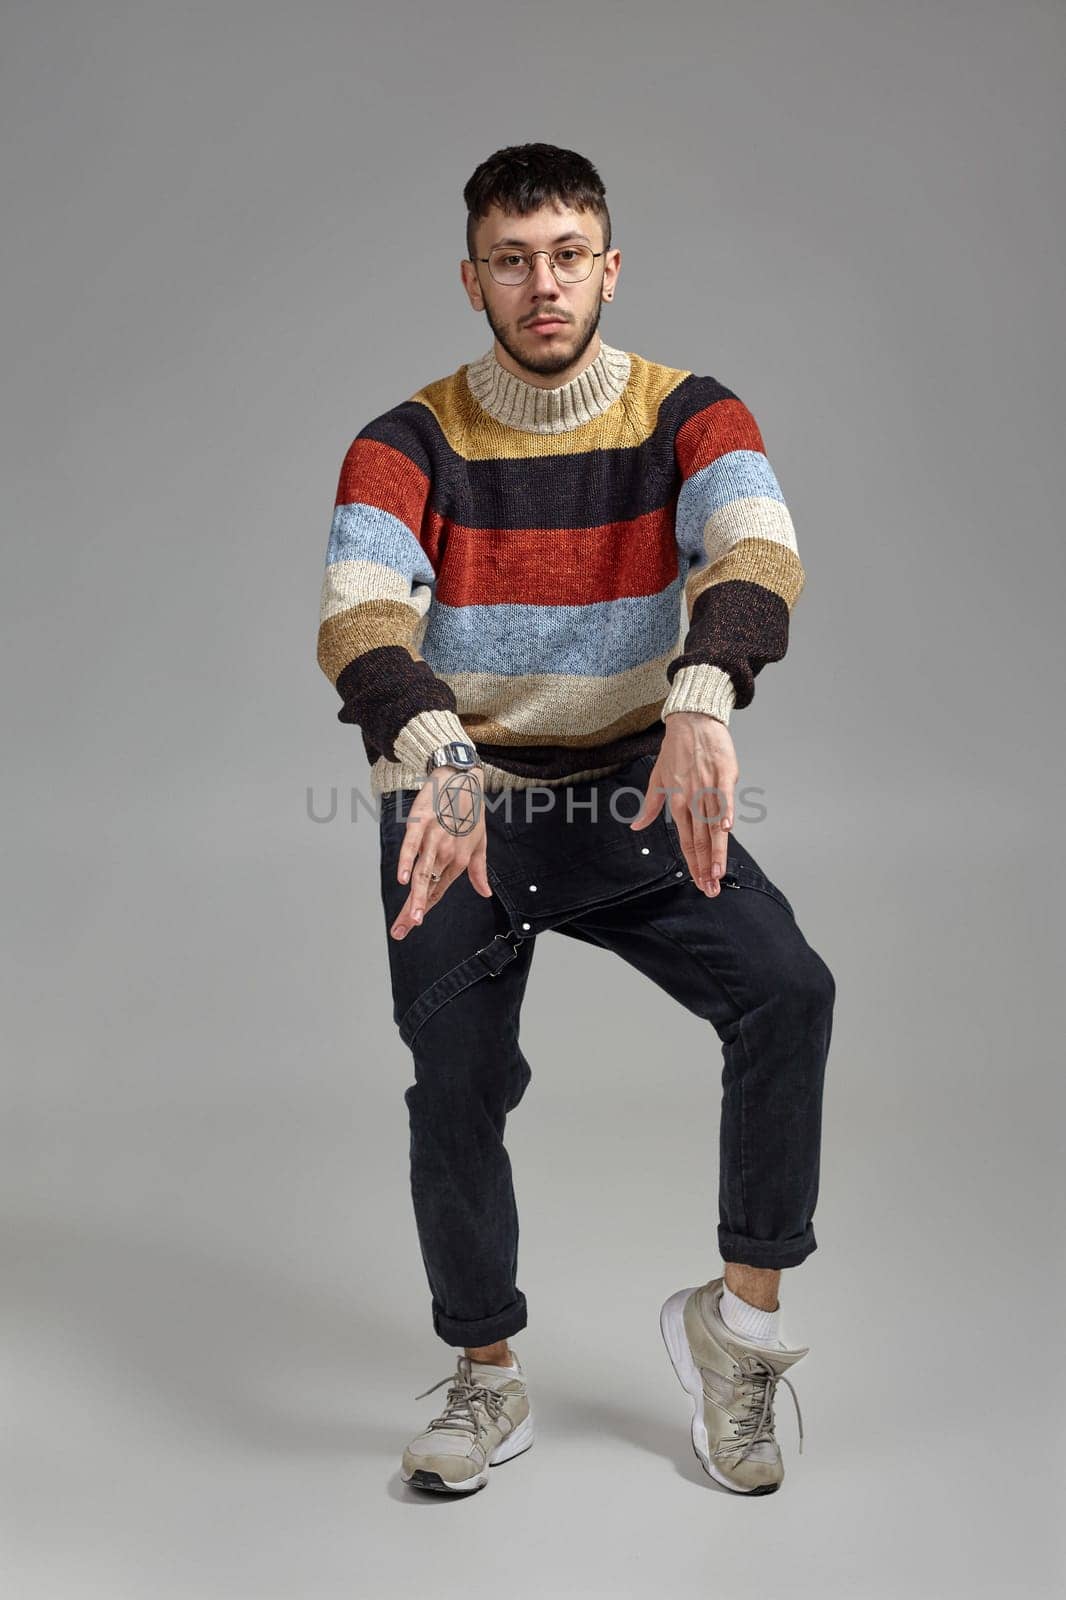 Full-length portrait of an athletic male in glasses, black jumpsuit, multi-colored sweater and gray sneakers fooling around in studio. Indoor photo of a man dancing on a gray background. Music and imagination.